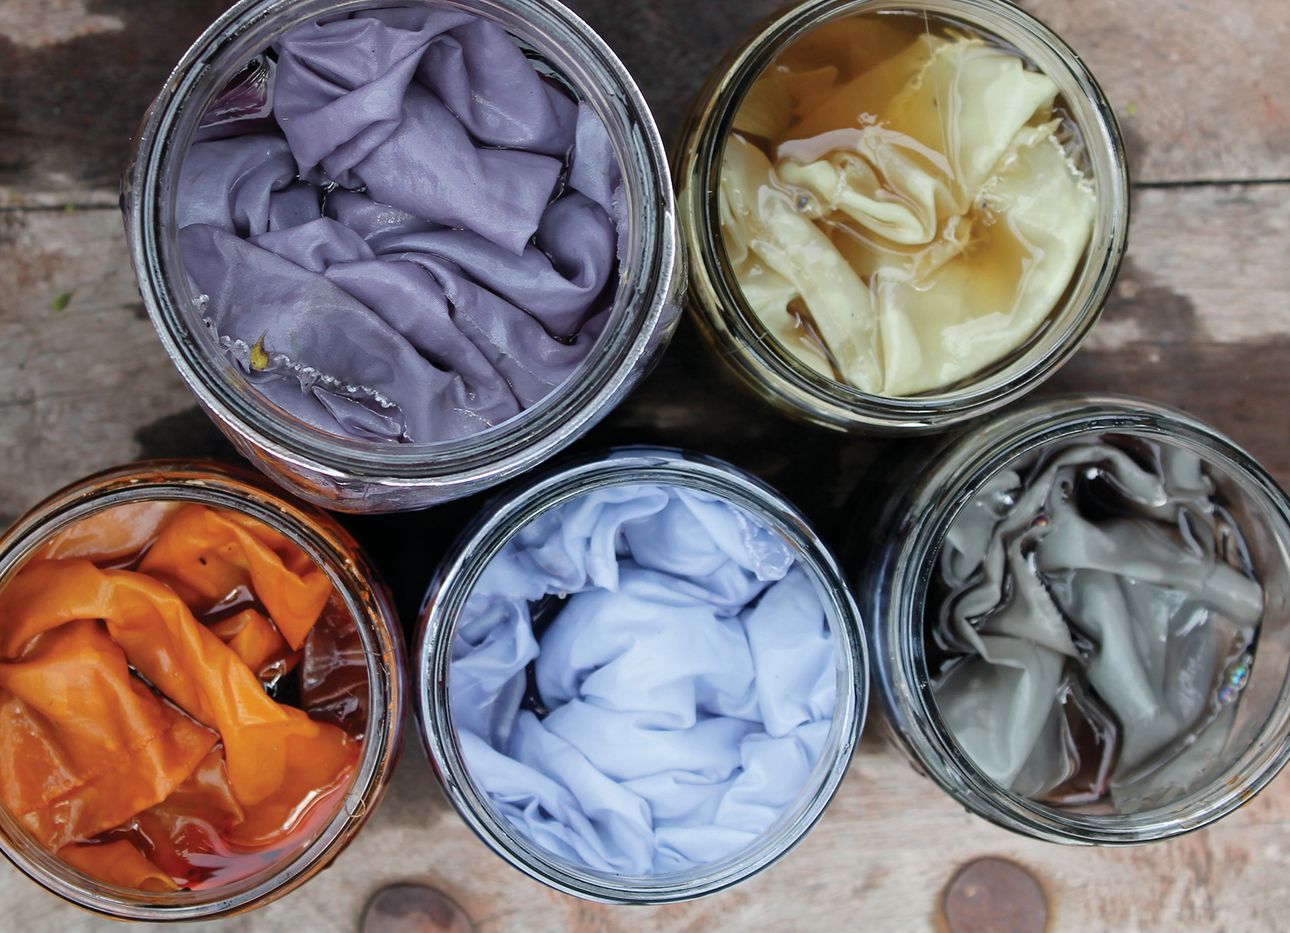 Five dye pots with colored fabrics inside them.